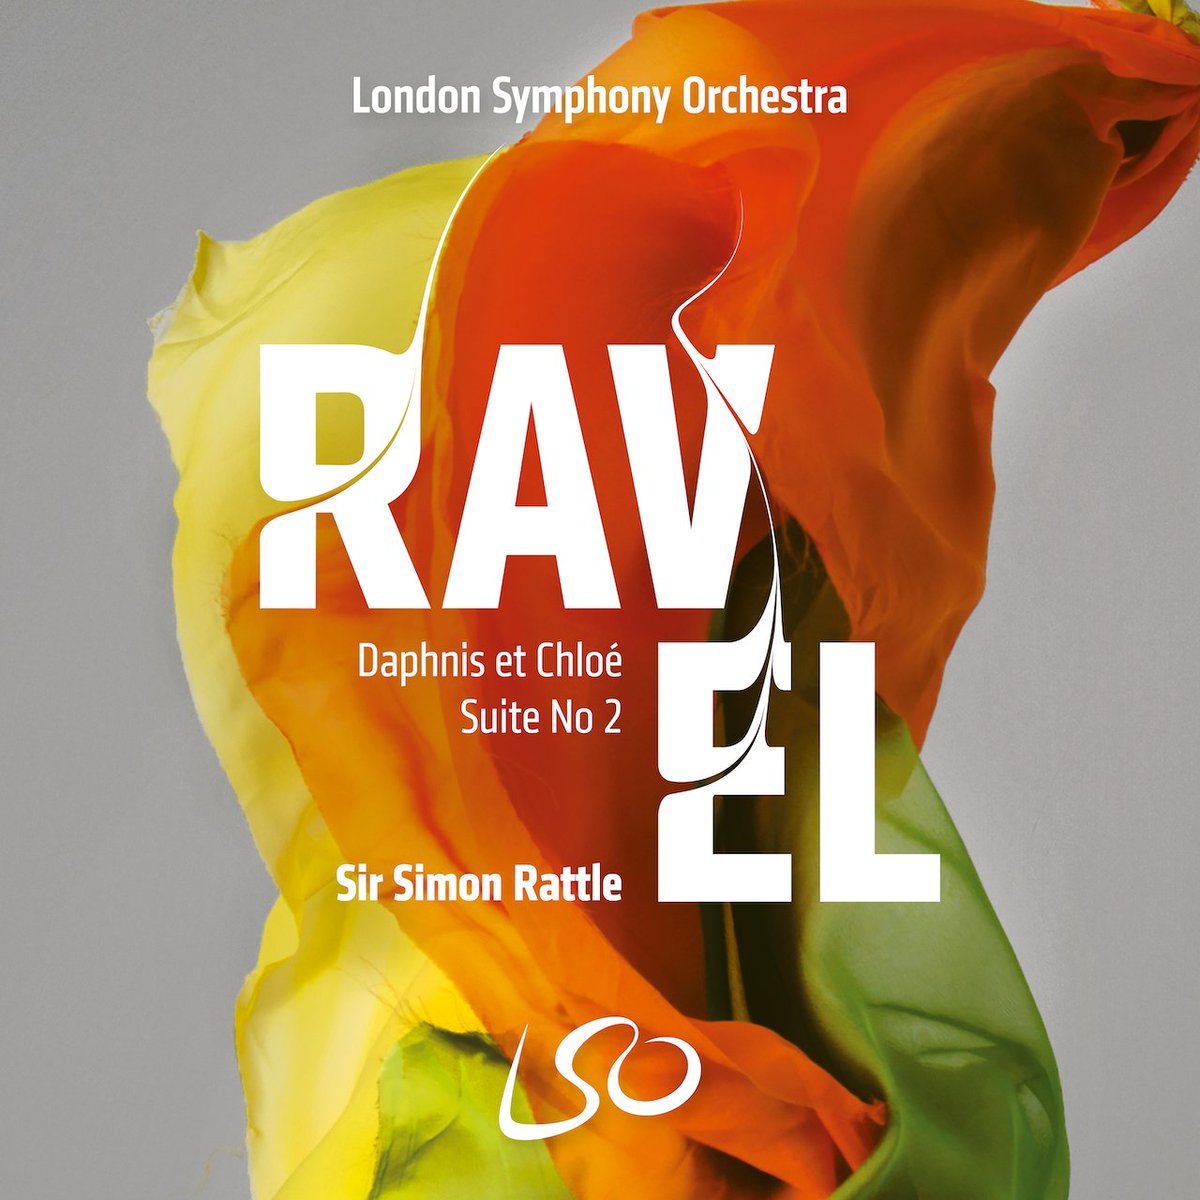 “One of the most sheerly beautiful pieces ever written,” says Simon Rattle about Ravel’s Daphnis et Chloé. 

Hear the ballet’s Suite No. 2 in #SpatialAudio exclusively on #AppleMusicClassical. @londonsymphony @SirSimonRattle apple.co/AppleMusicClas…